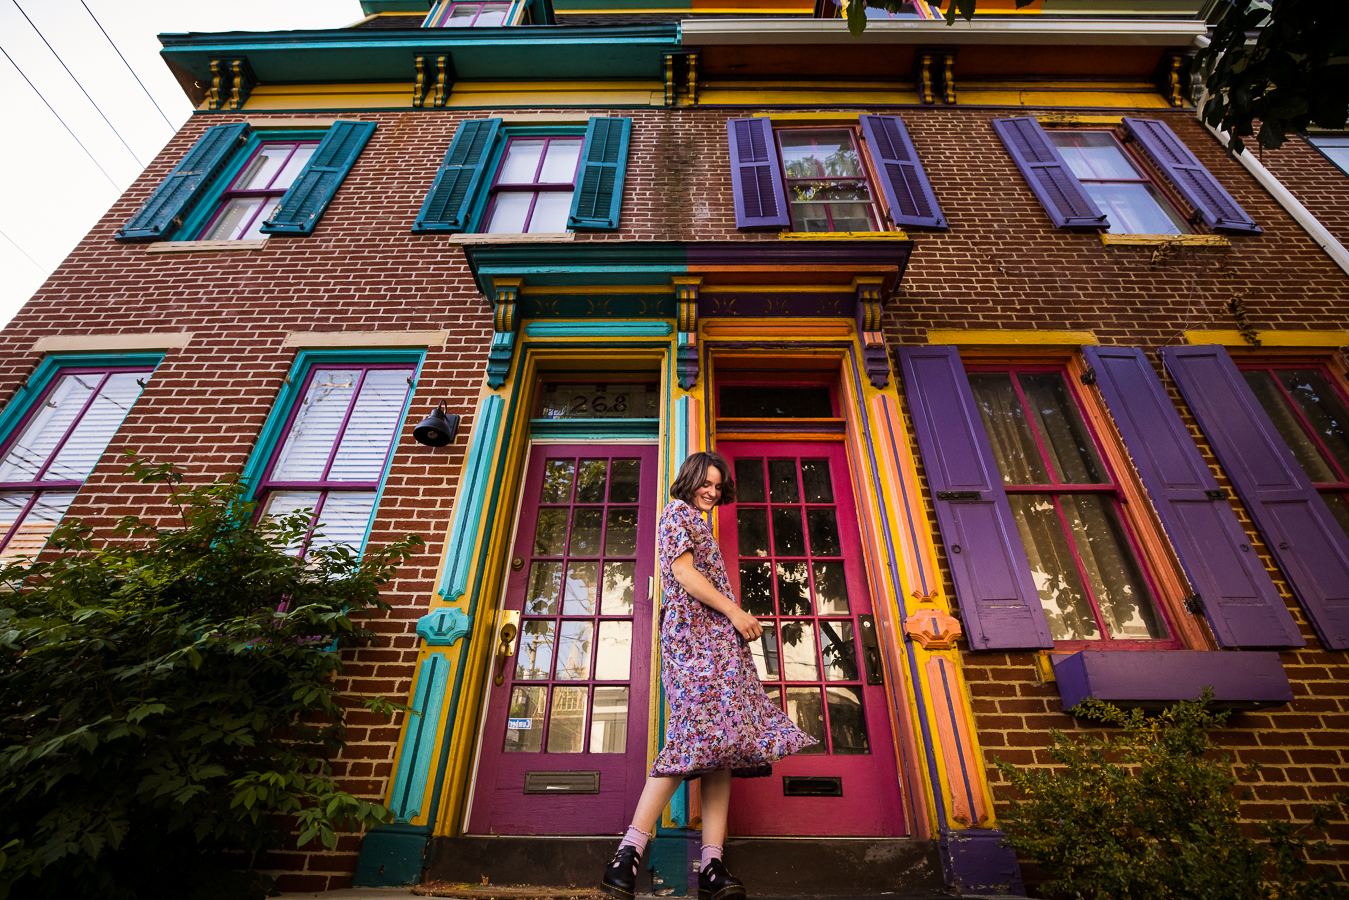 fun, colorful image of this artist as she explores the colorful vibrant downtown buildings in Harrisburg for this senior portrait session